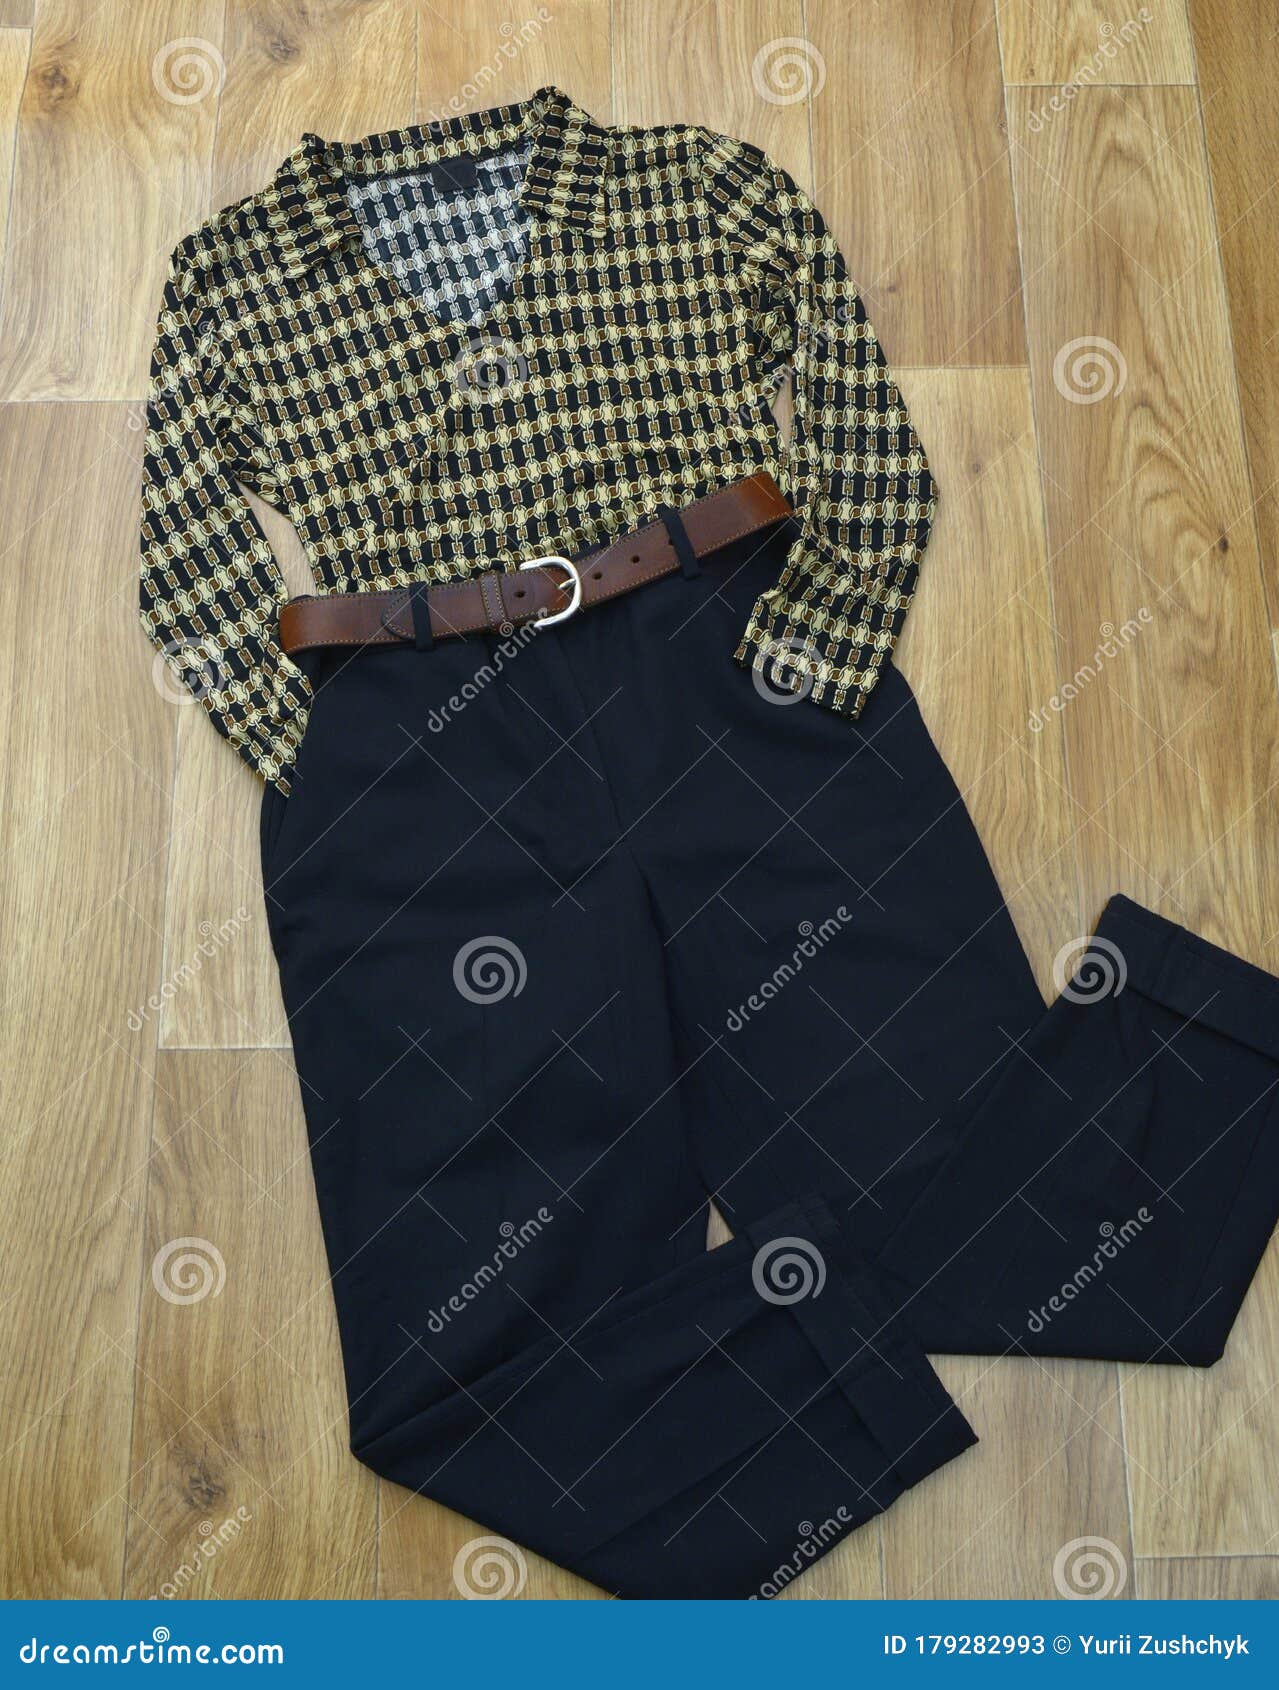 Steel Brown Shirt With Brown Belt And Dark Tan Pants  Boots Pictures  Photos and Images for Facebook Tumblr Pinterest and Twitter